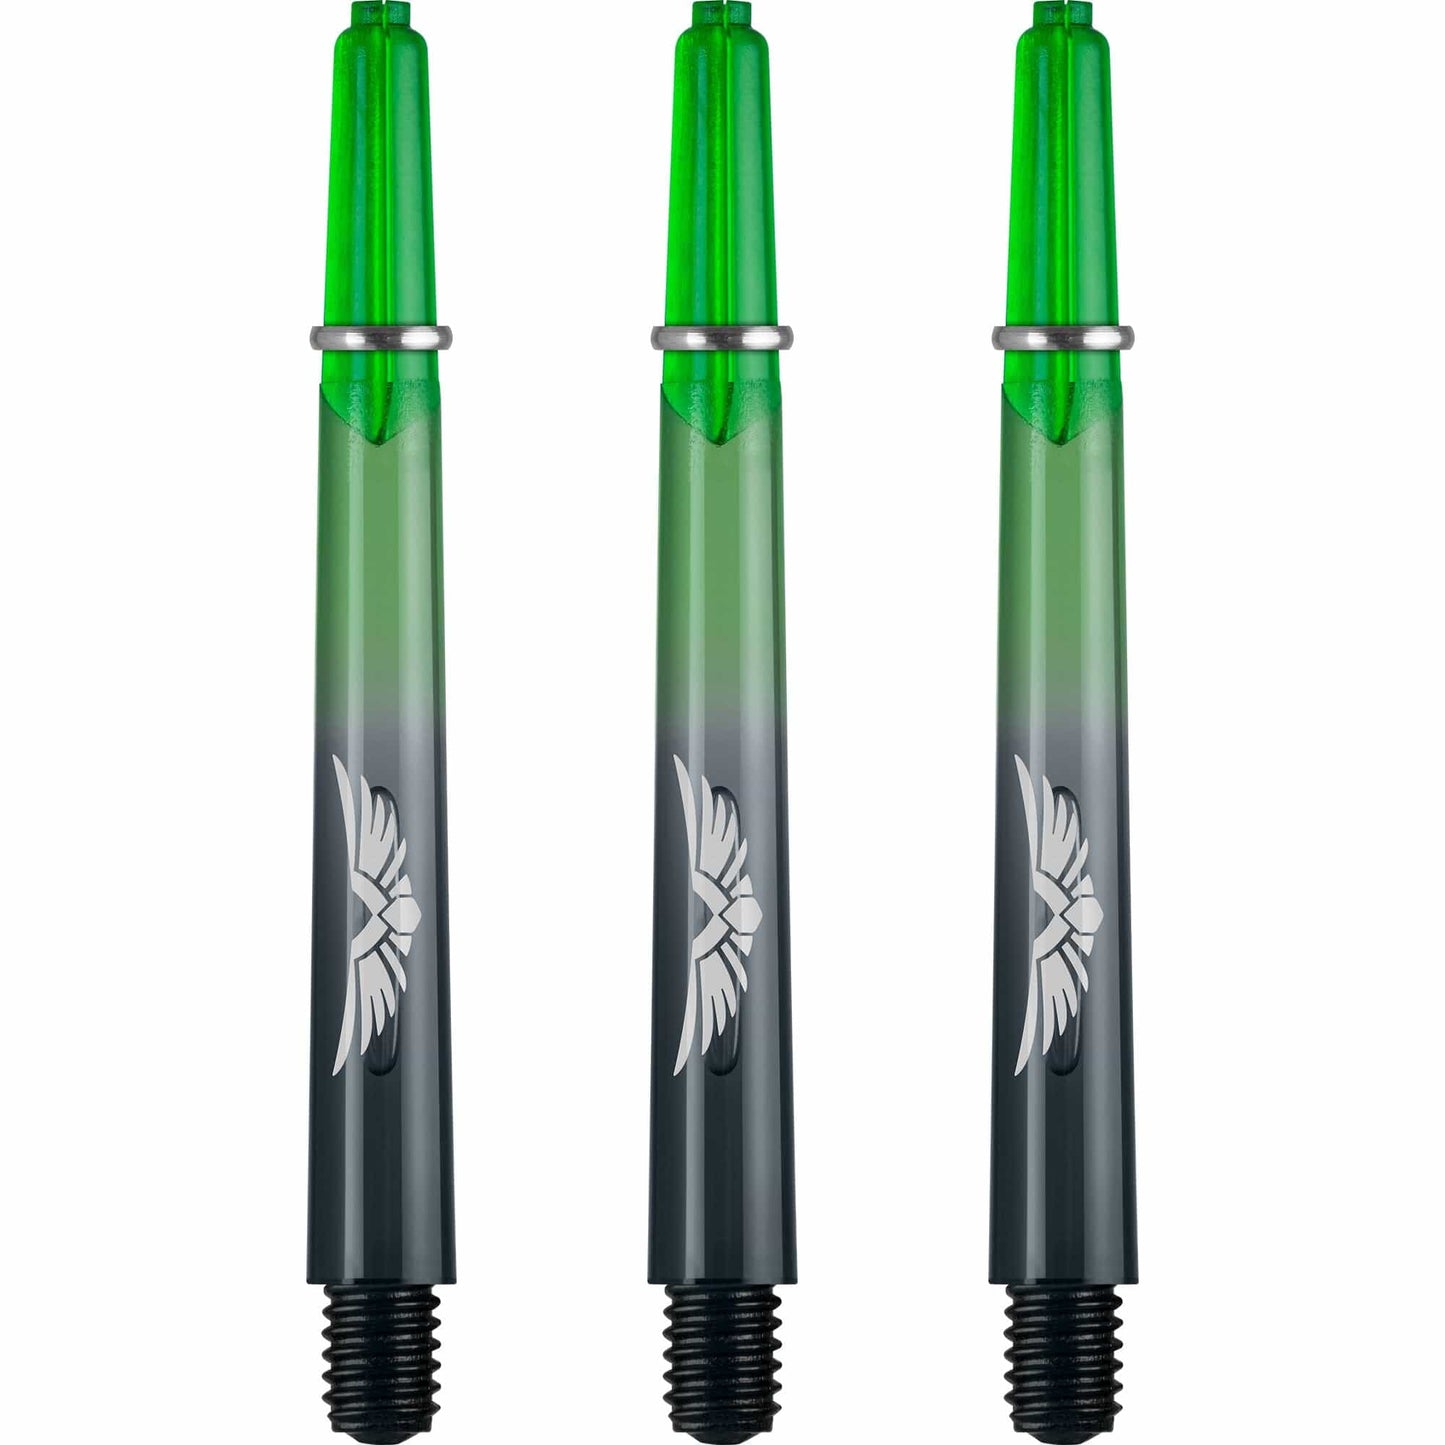 Shot Eagle Claw Dart Shafts - with Machined Rings - Strong Polycarbonate Stems - Black Green Medium